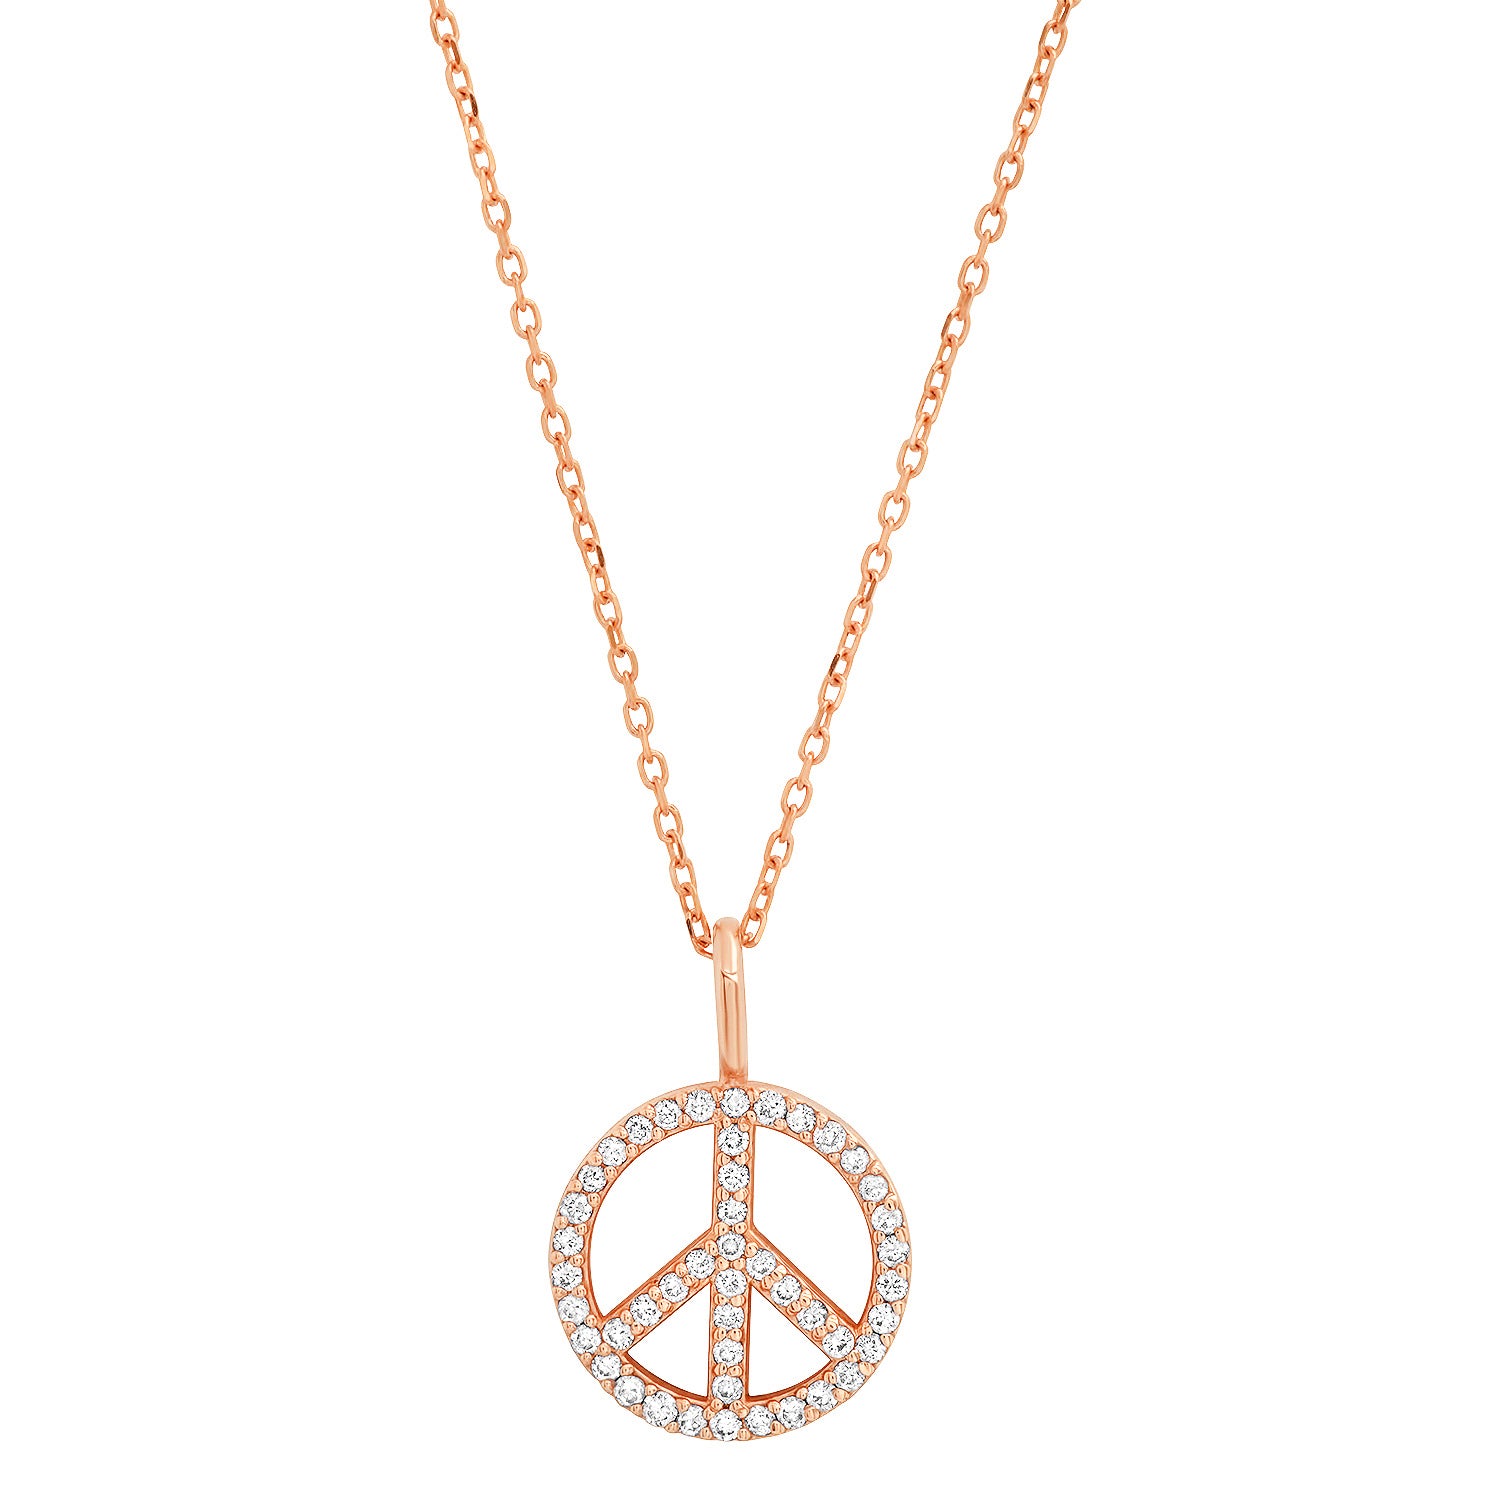 Large Peace Symbol Enamel Pendant Necklace on Adjustable Natural Fiber -  From War to Peace